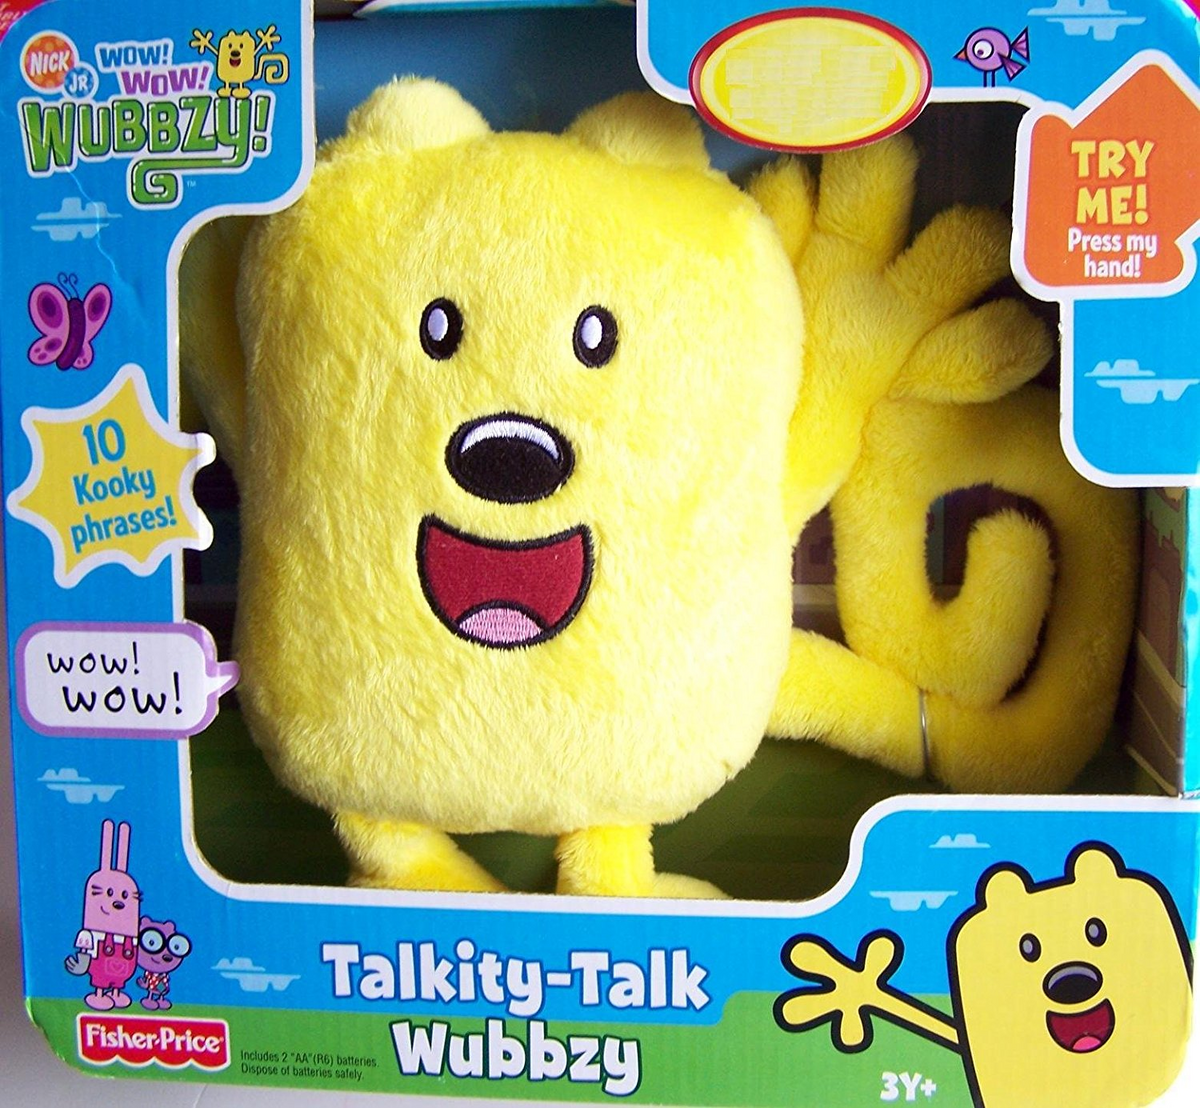 https://static.wikia.nocookie.net/wubbzy/images/e/e6/Talkity-Talk_Wubbzy_-_Package%2C_Front.png/revision/latest/scale-to-width-down/1200?cb=20171118194012